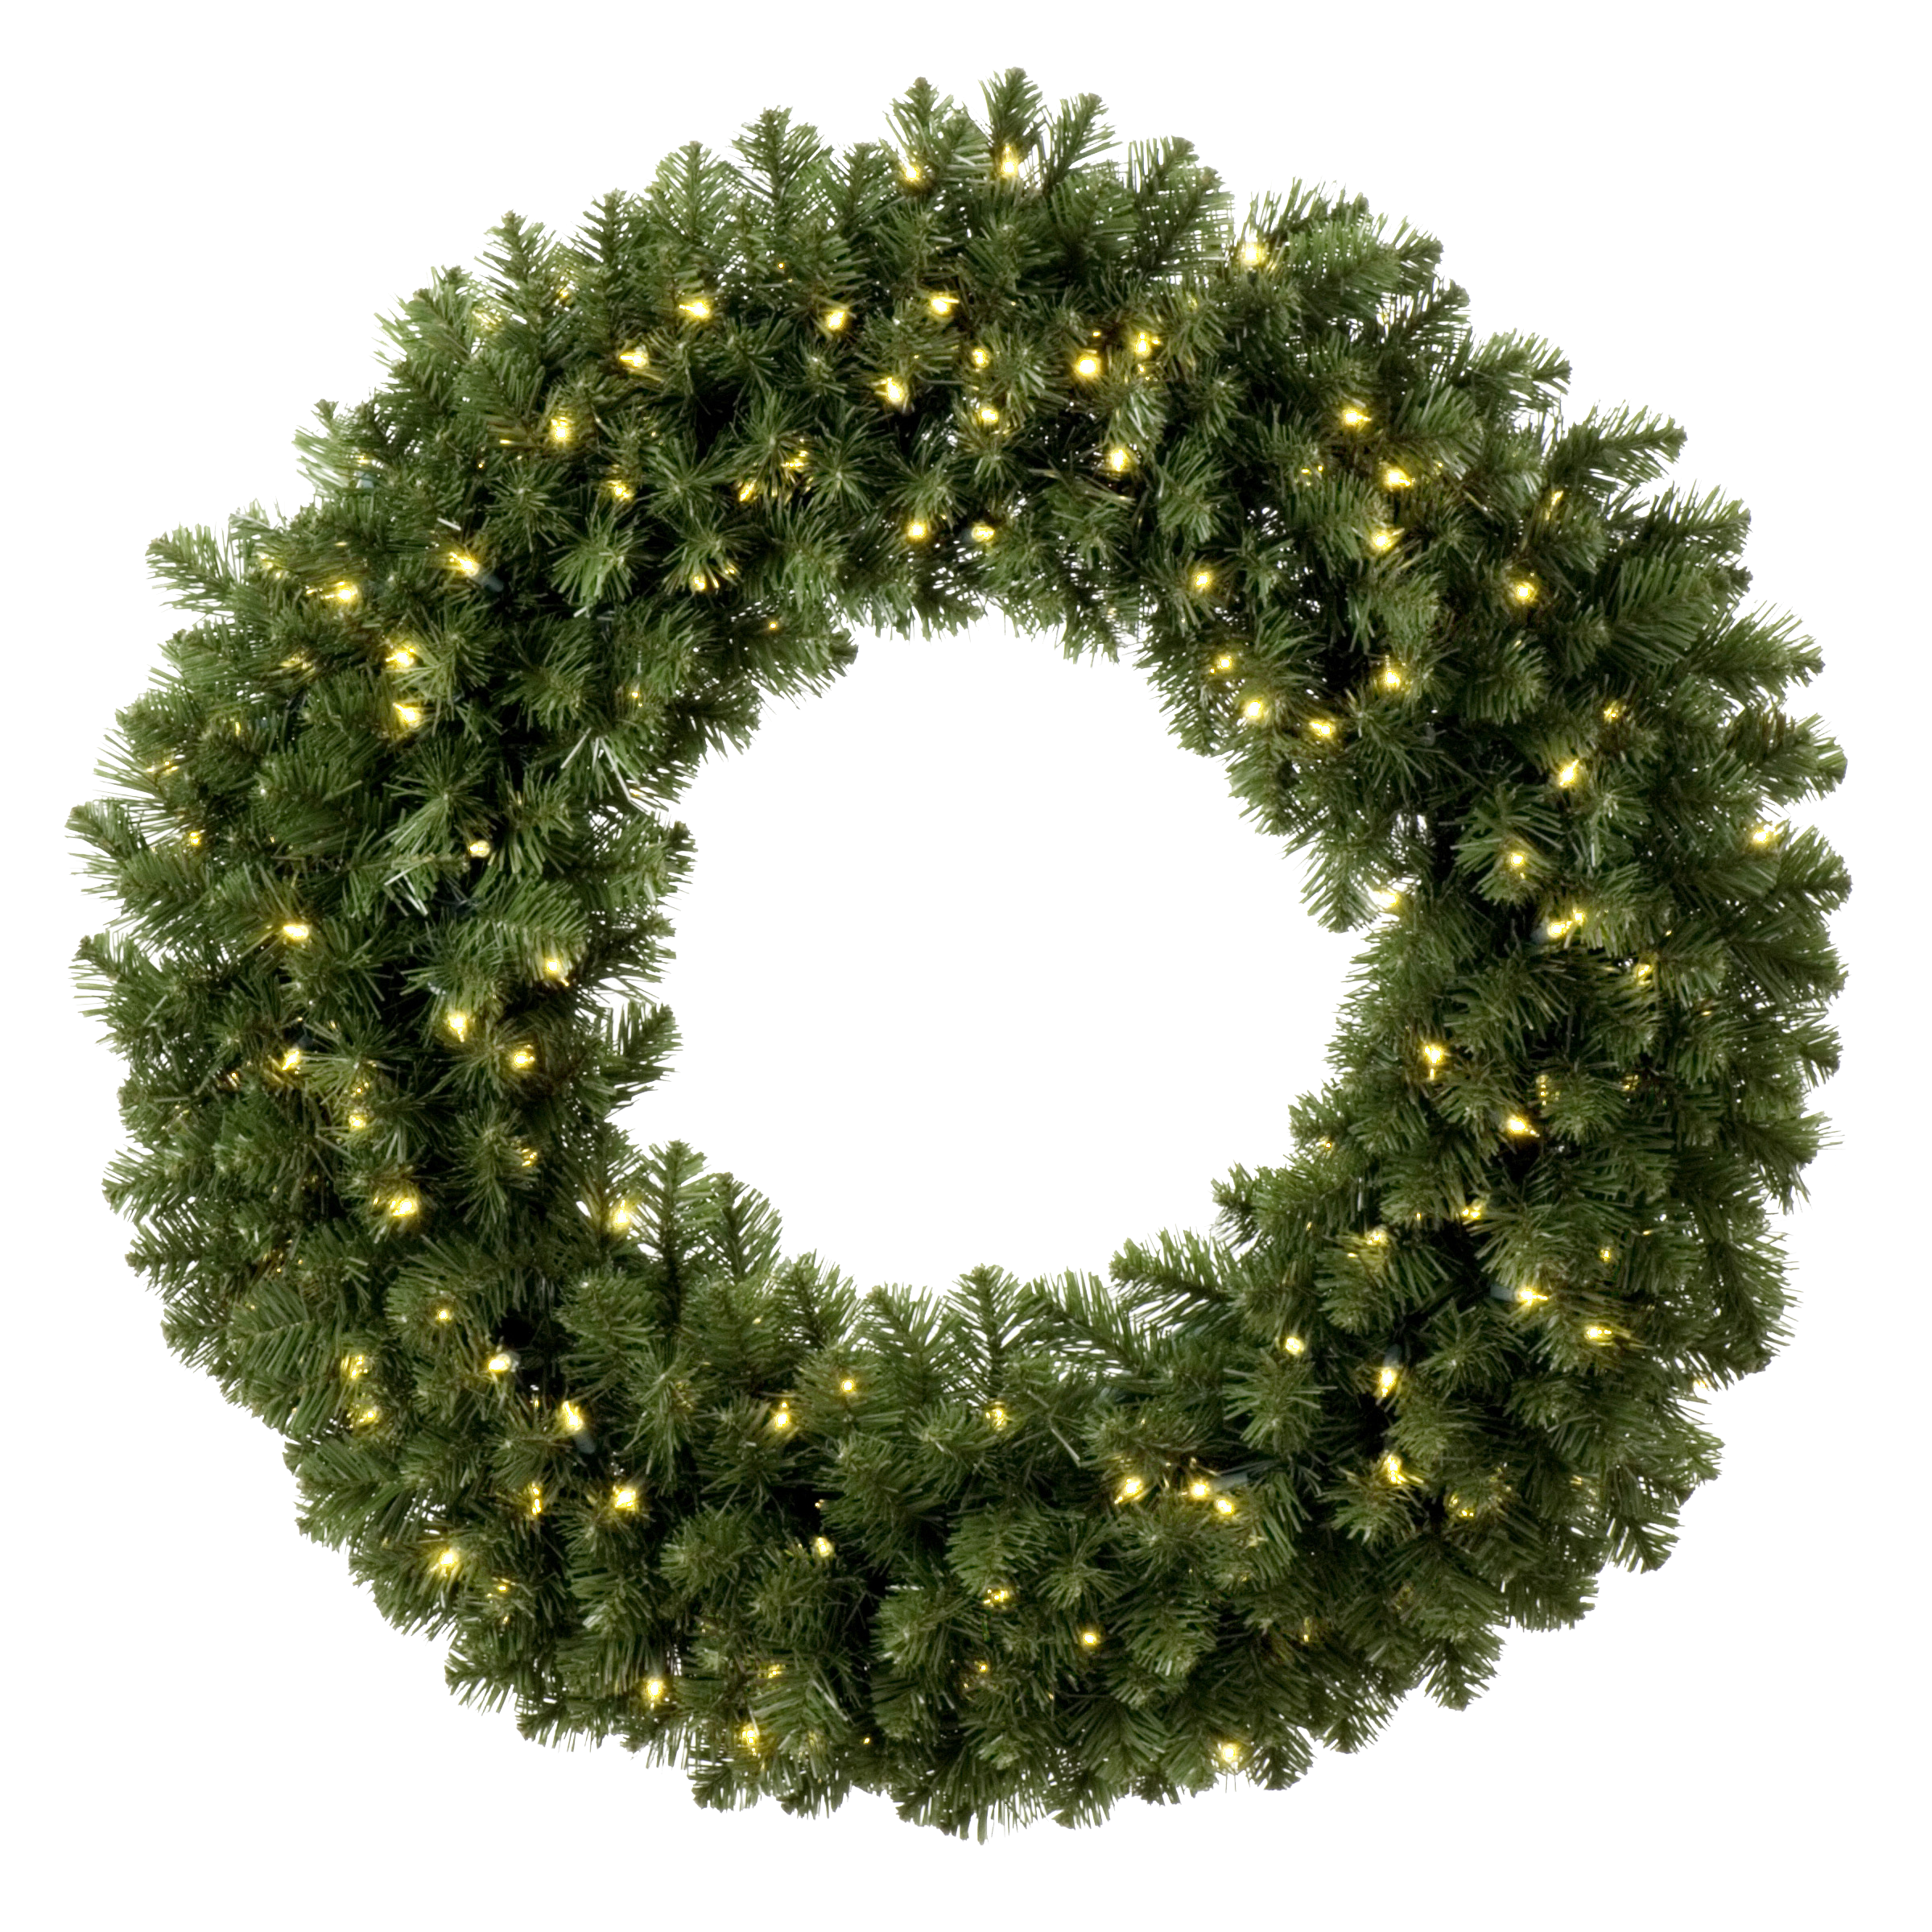 Detail Wreath Christmas Png Nomer 27